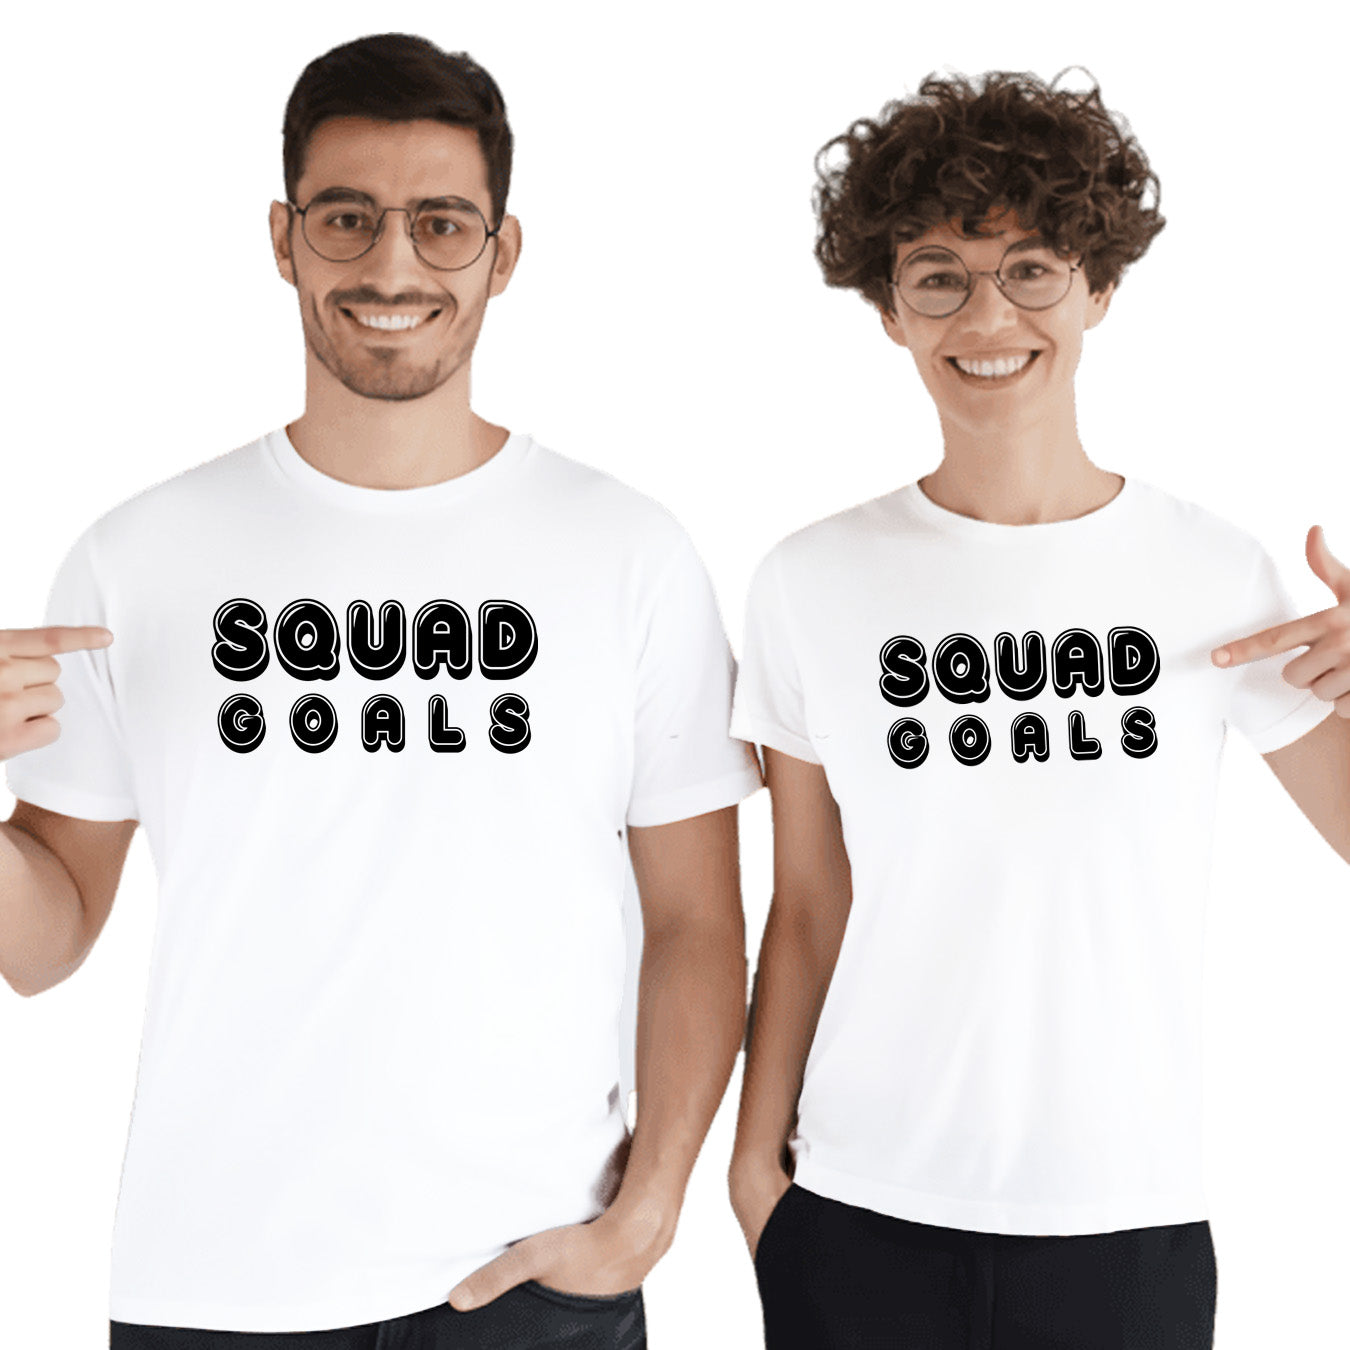 Boys Squad Goals Matching Printed Tshirts (Pack Of 2)